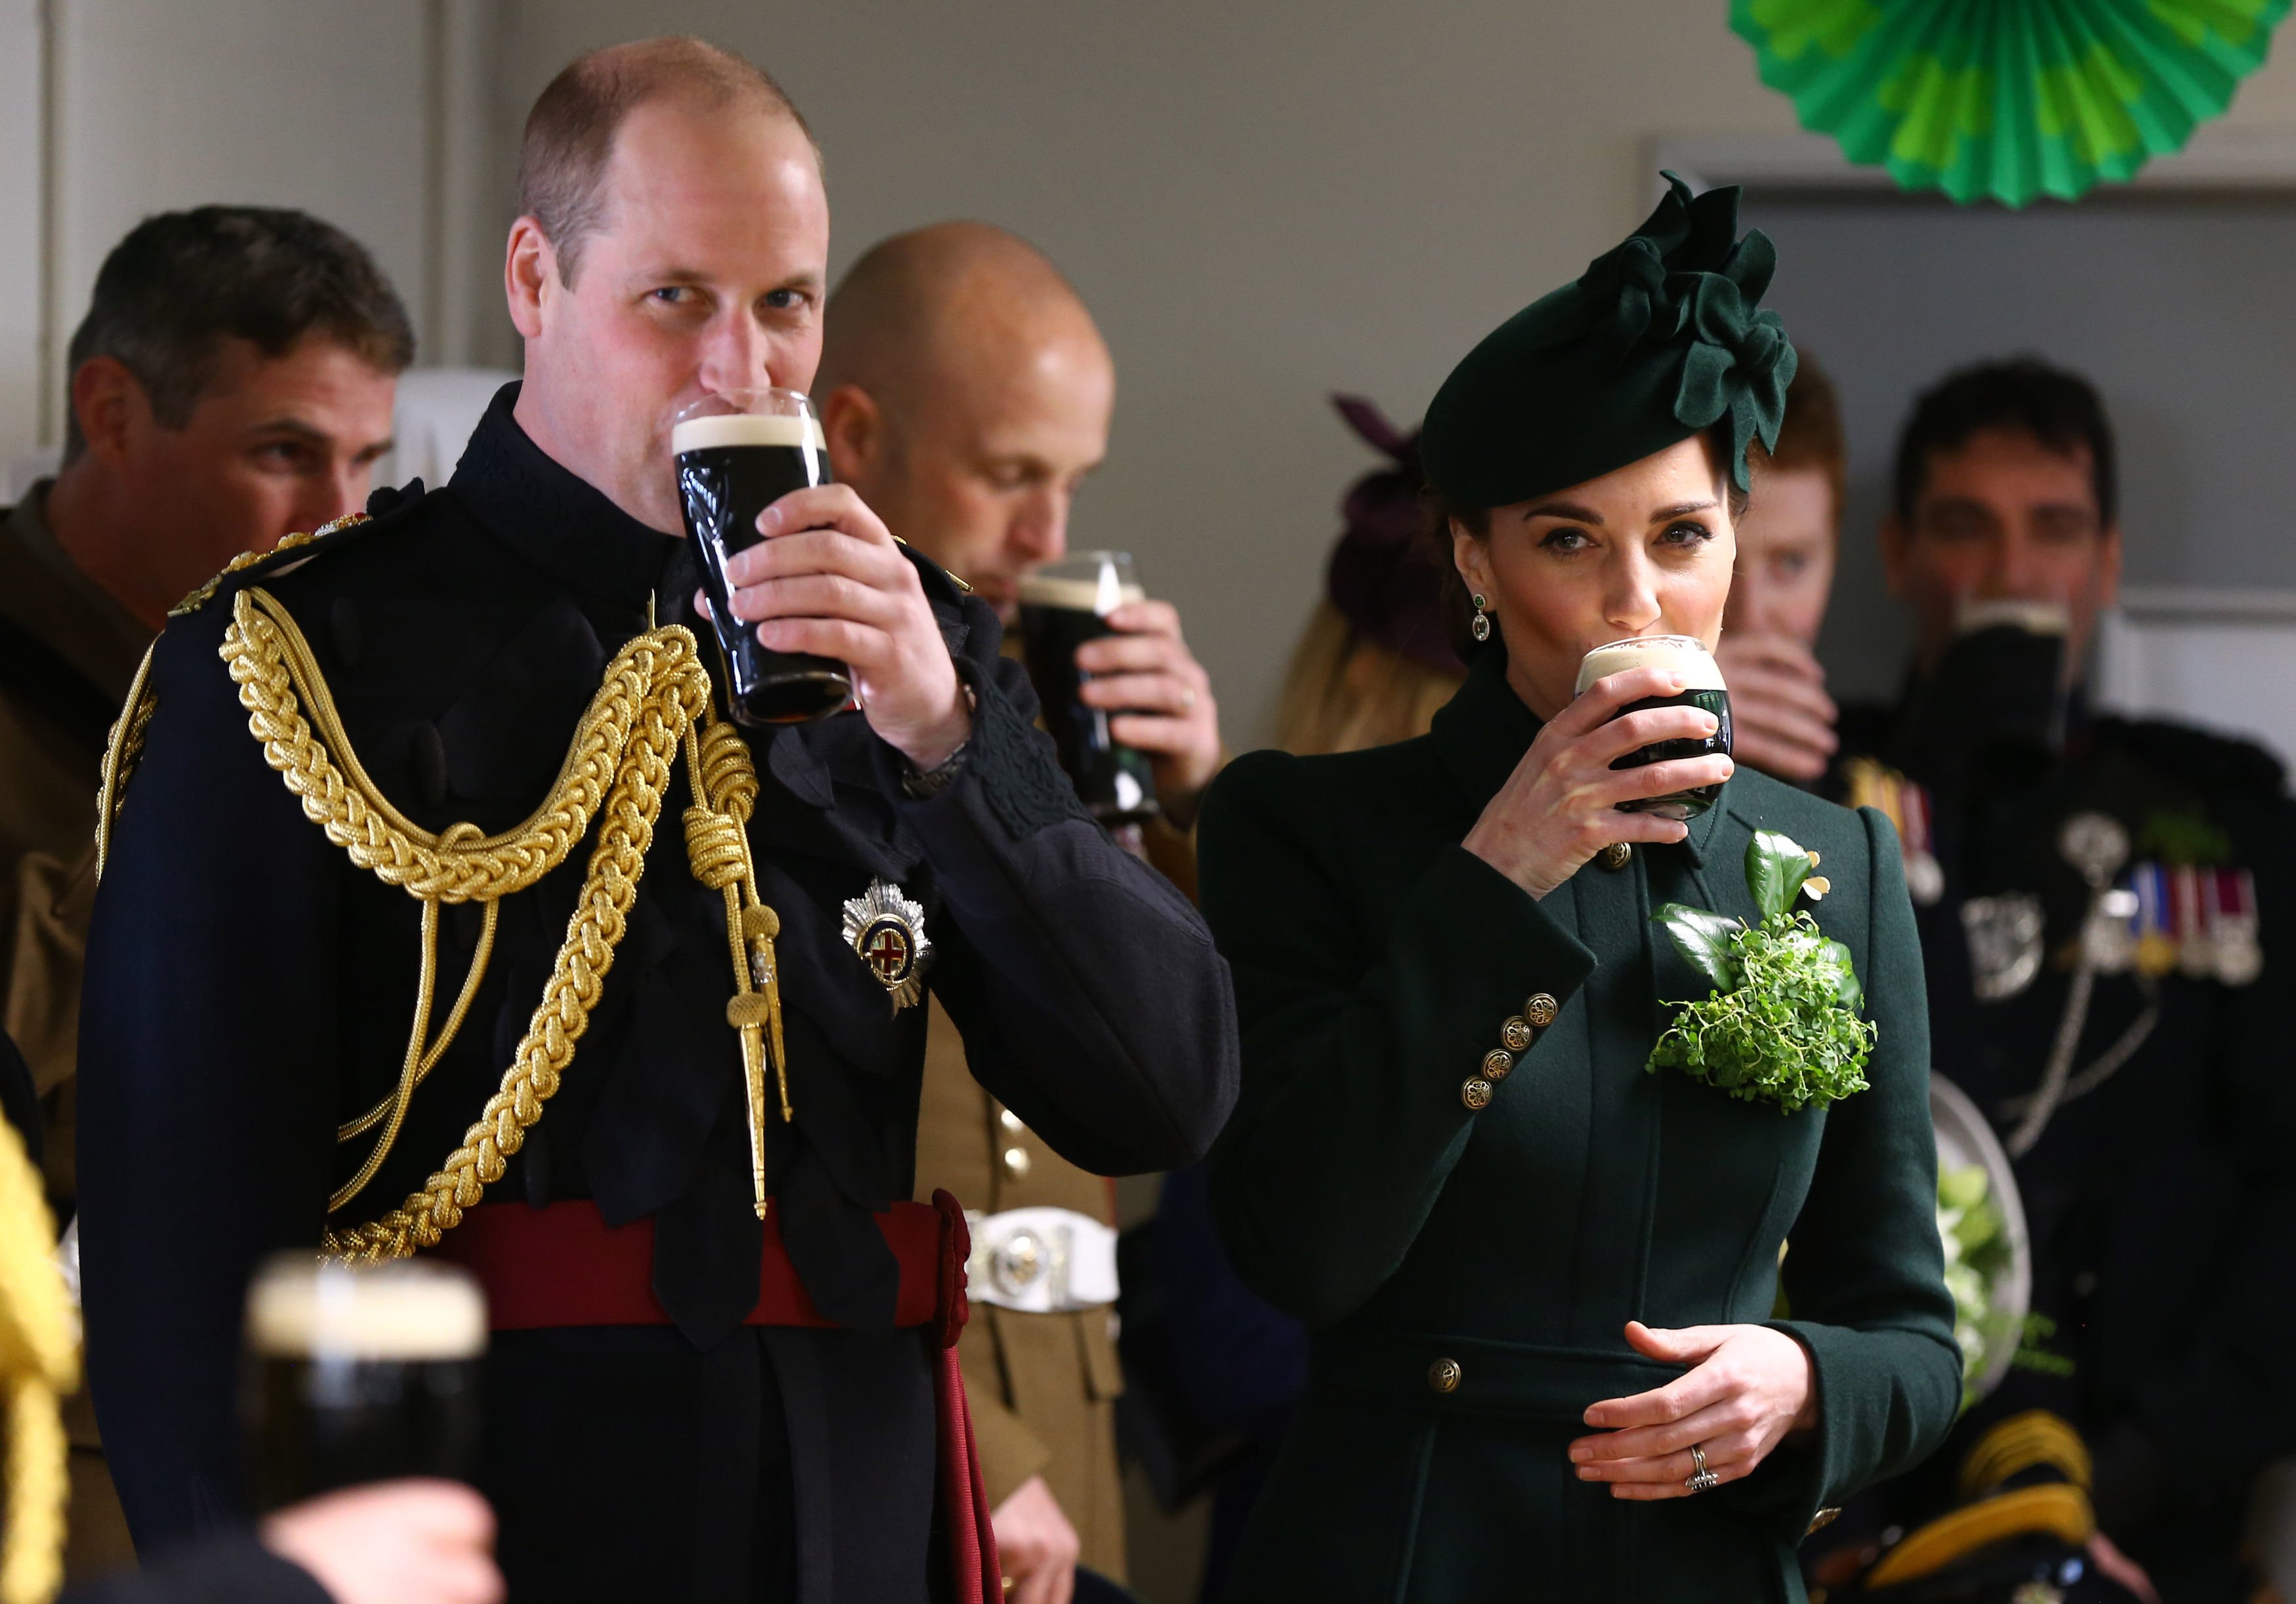 Prince William and Kate Middleton meets with Irish Guards after attending the St Patrick's Day parade at Cavalry Barracks in Hounslow on March 17, 2019 | Photo: Getty Images